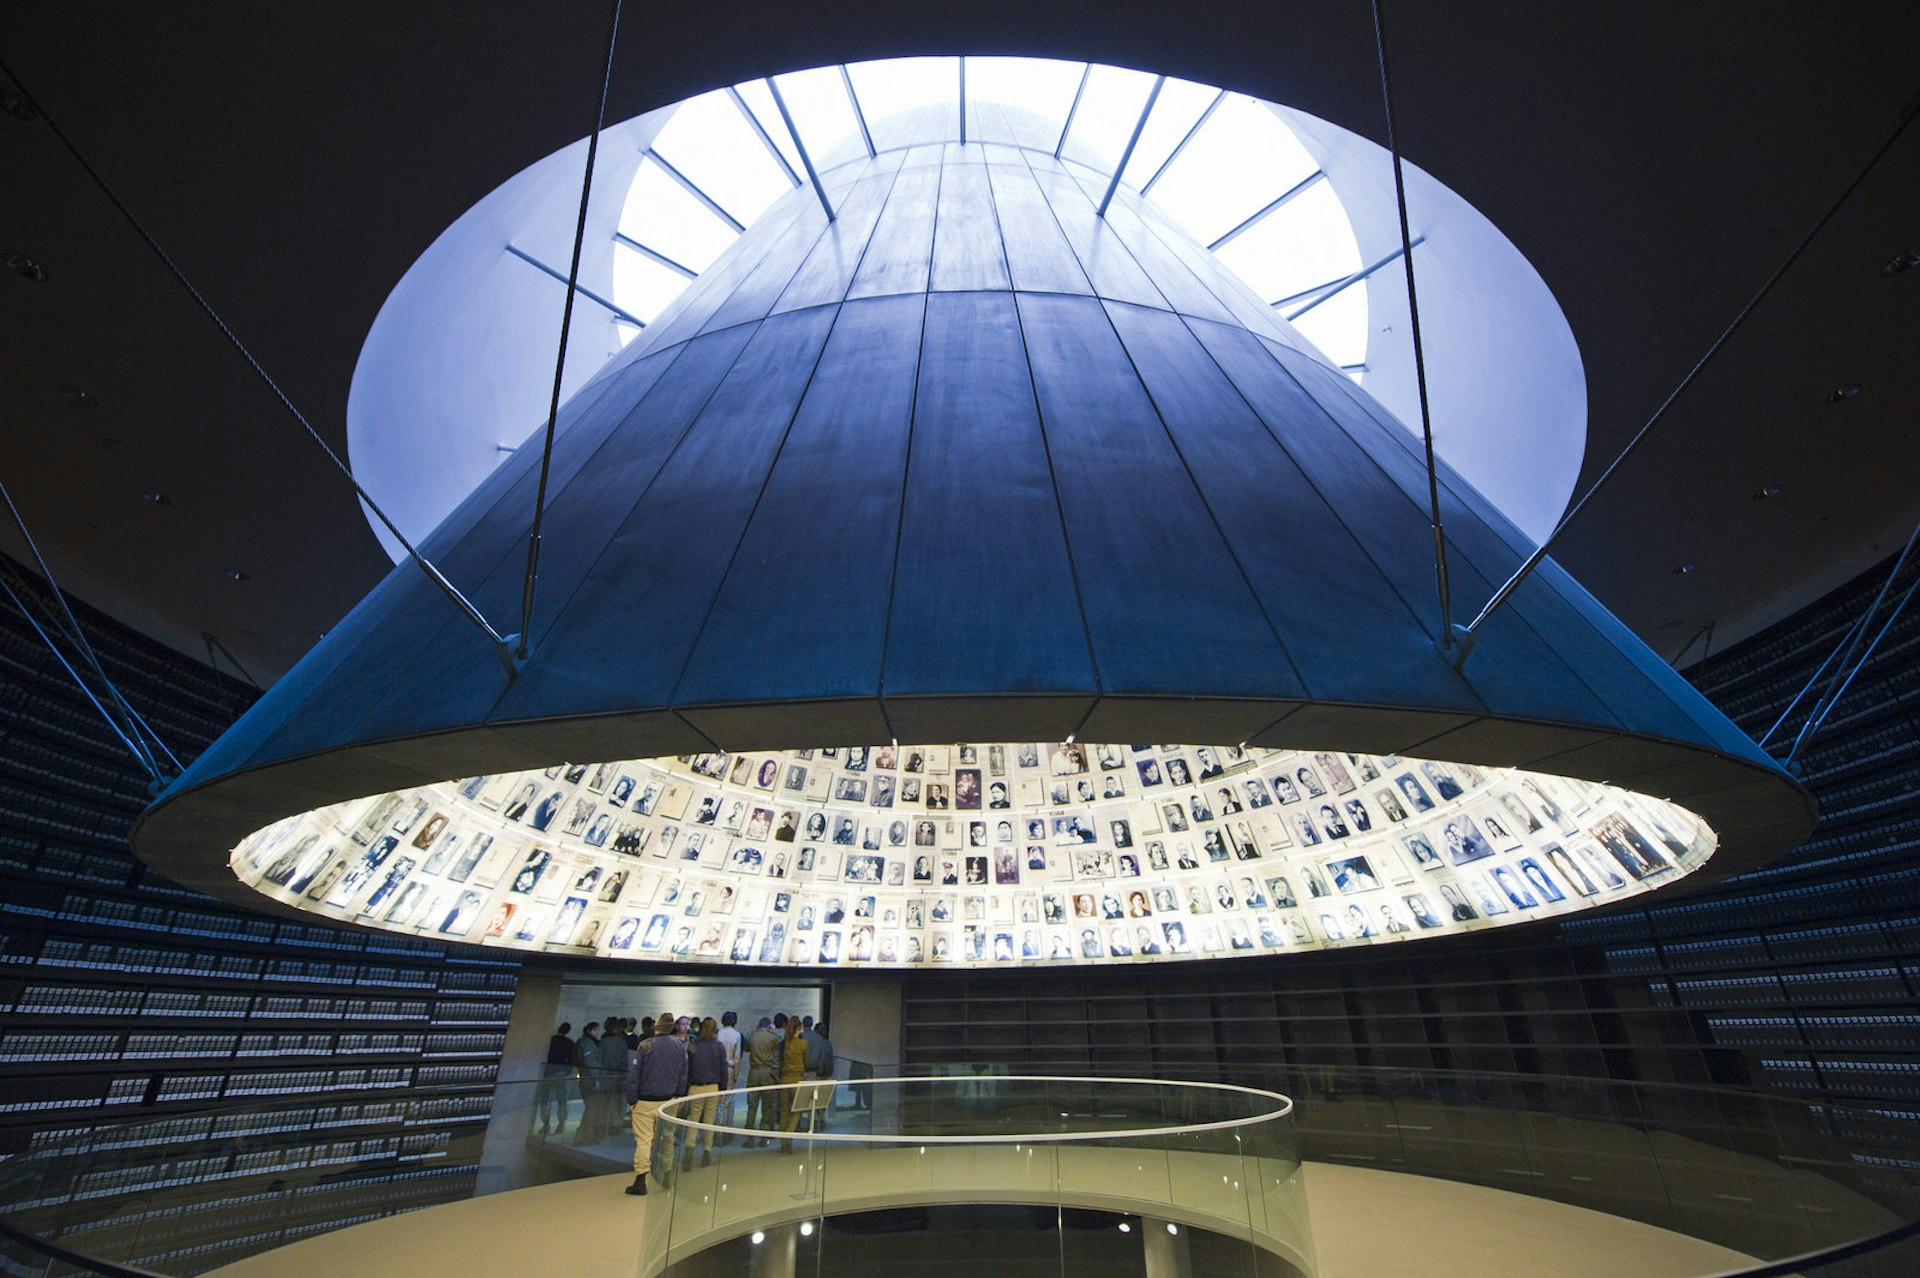 The Yad Vashem memorial displays the names and details of millions of Holocaust victims © Alison Wright / Getty Images